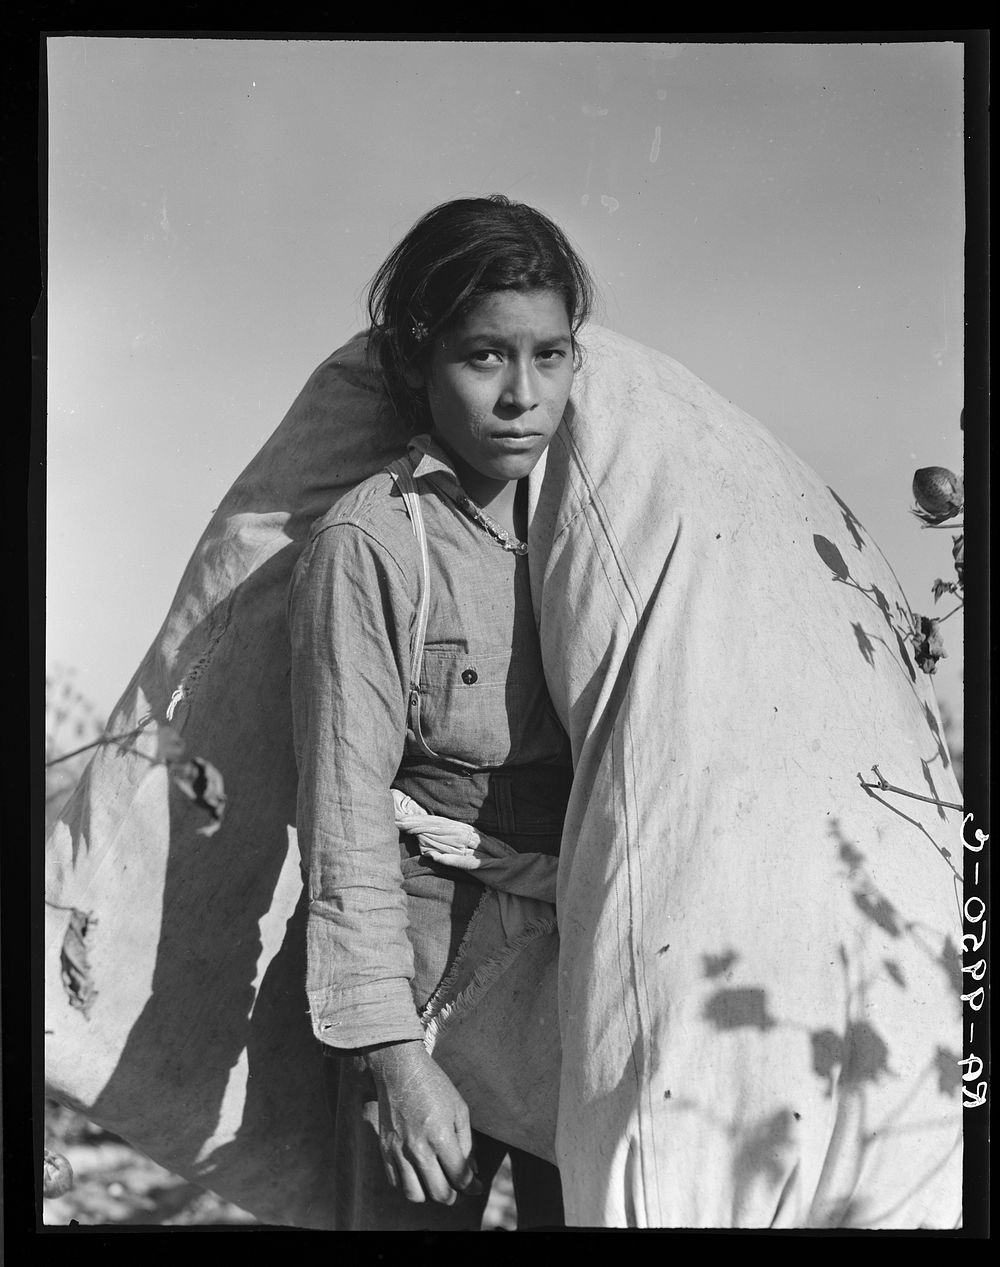 Mexican cotton picker. Southern San Joaquin Valley, California. Sourced from the Library of Congress.